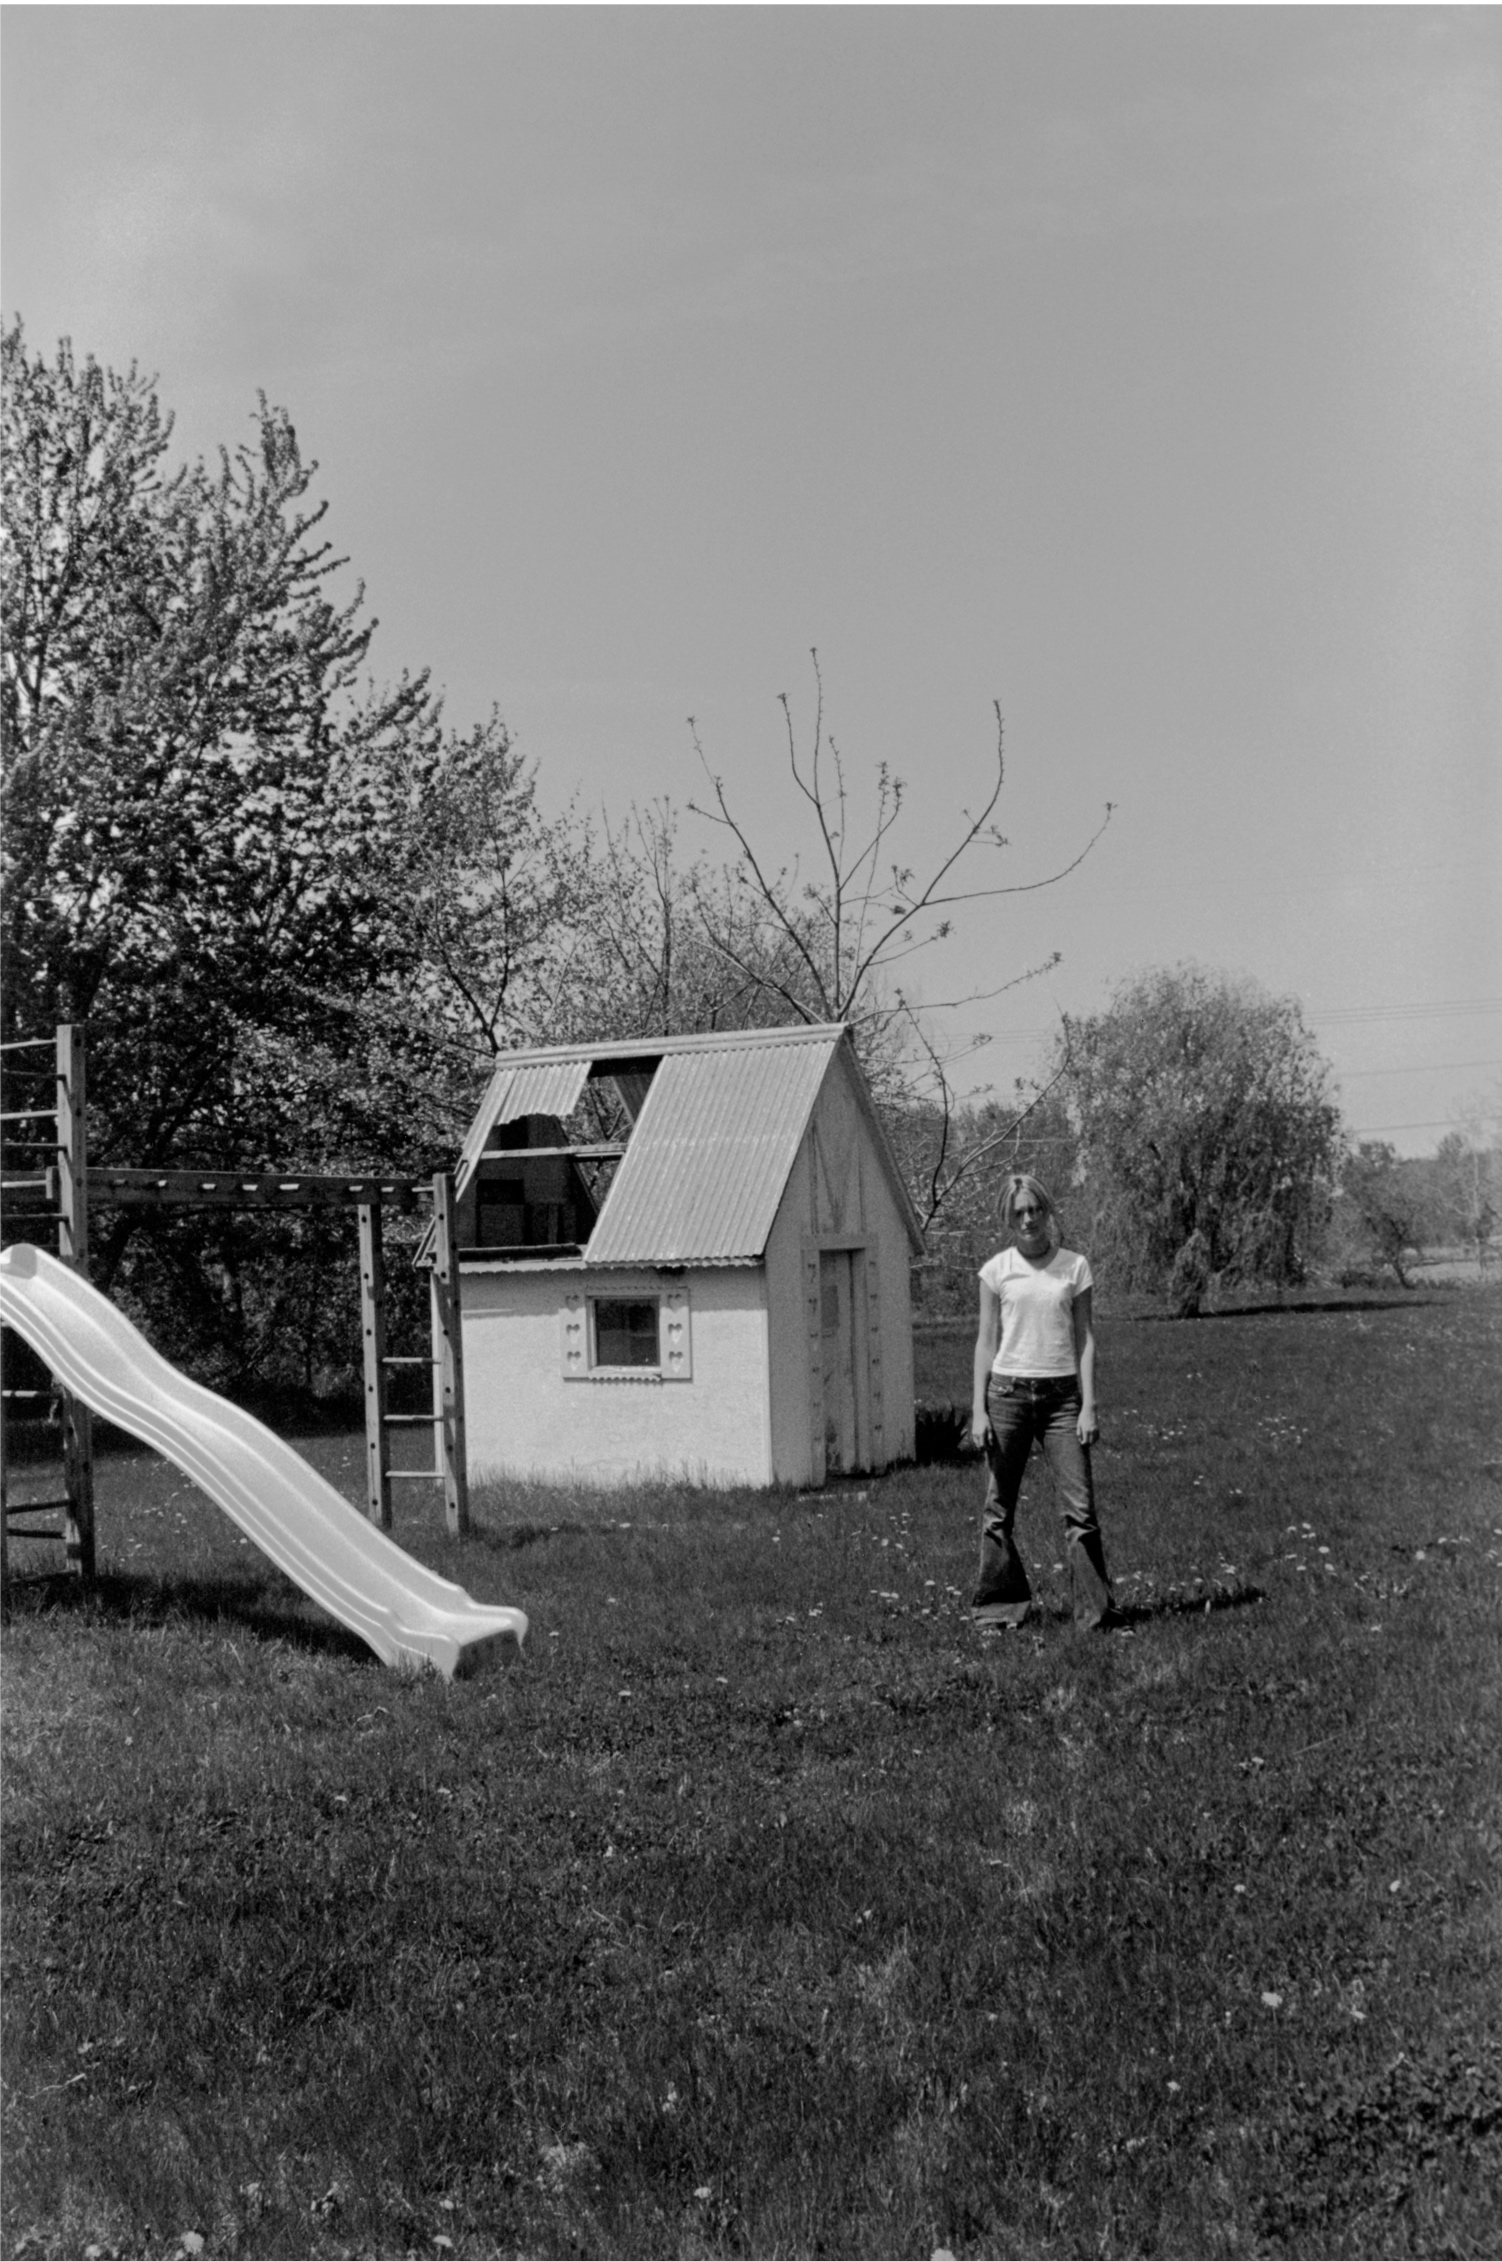 Crystal with the playhouse after moving out, 2018/1998